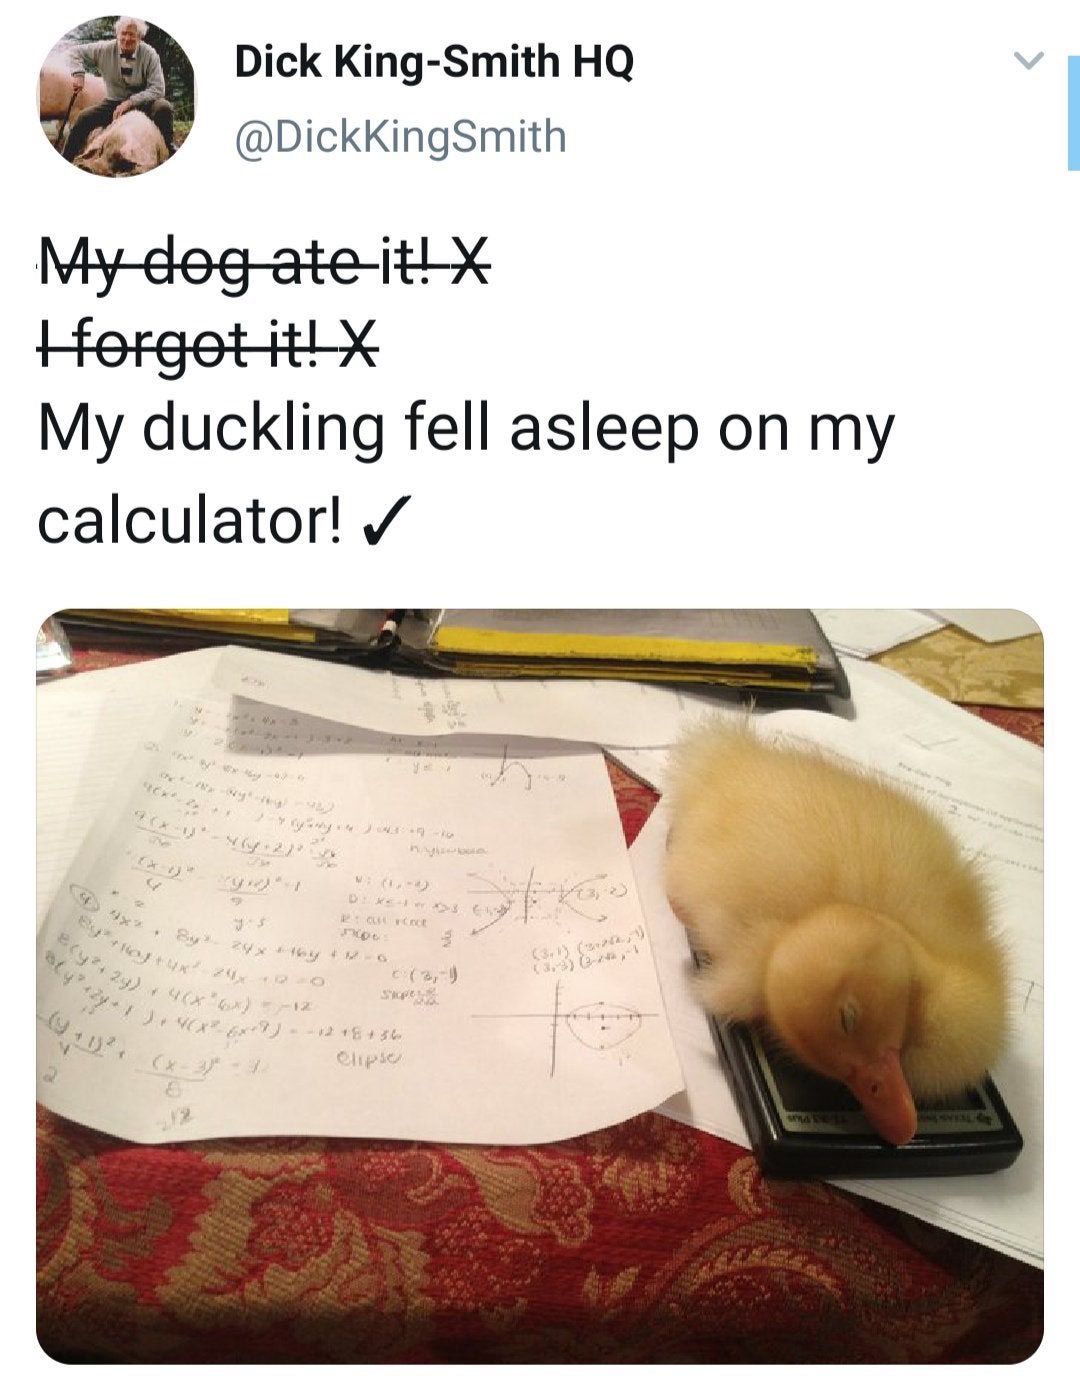 duckling on a calculator - Dick KingSmith Hq My dog ate it! forgot it! My duckling fell asleep on my calculator! Dike 4x Cu Vode 56 clipse